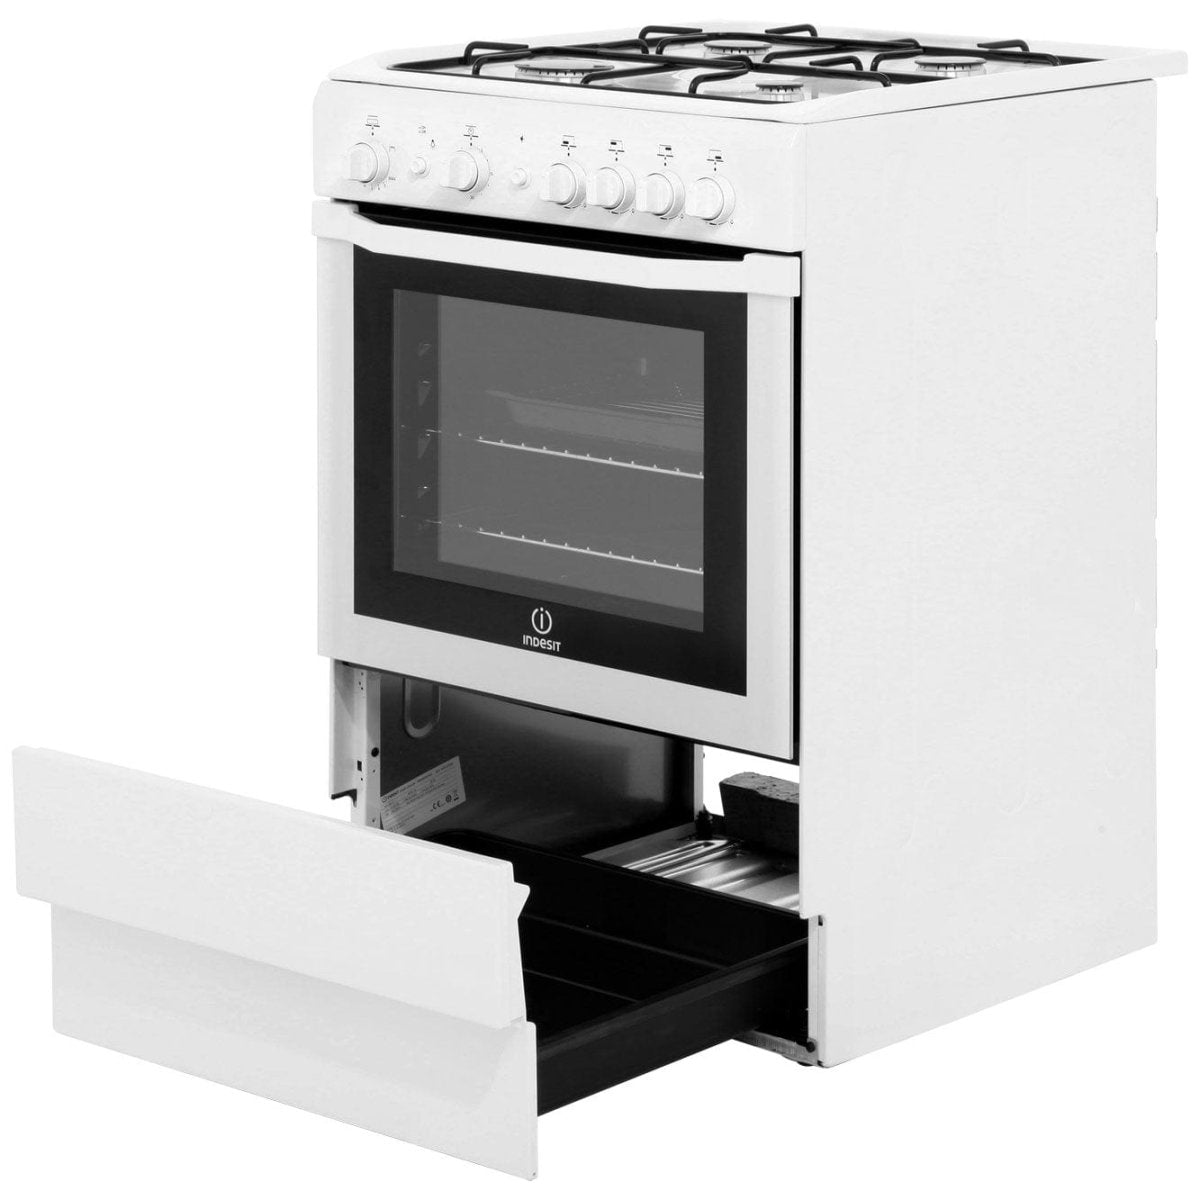 INDESIT I6GG1W 60cm Gas Cooker with Single Oven - White | Atlantic Electrics